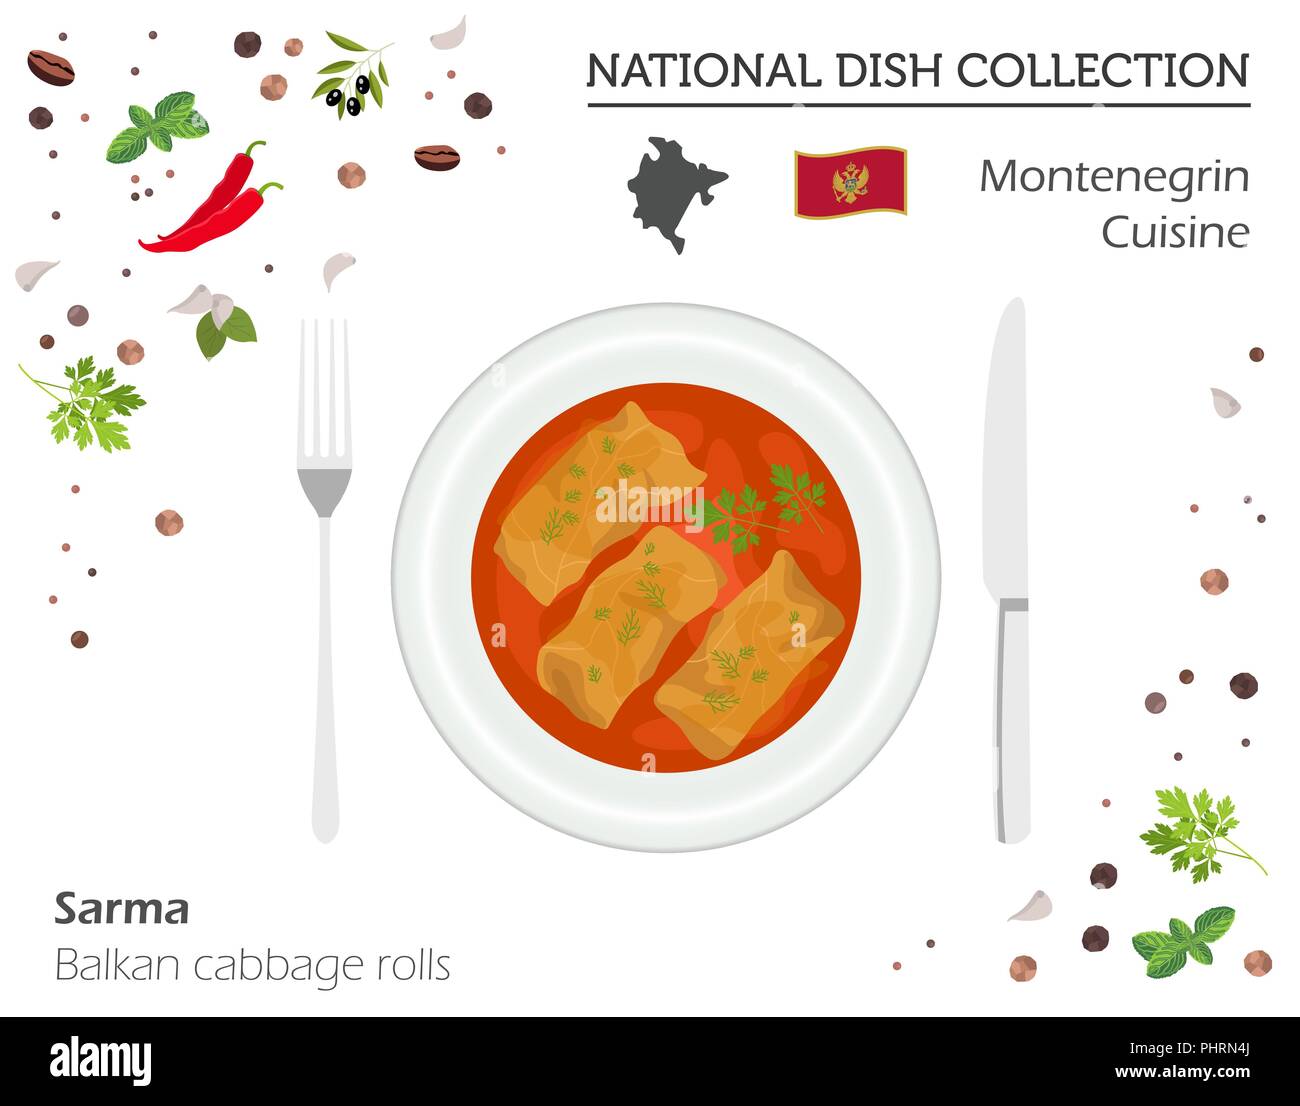 Montenegrin Cuisine. European national dish collection. Balkan cabbage rolls isolated on white, infographic. Vector illustration Stock Vector